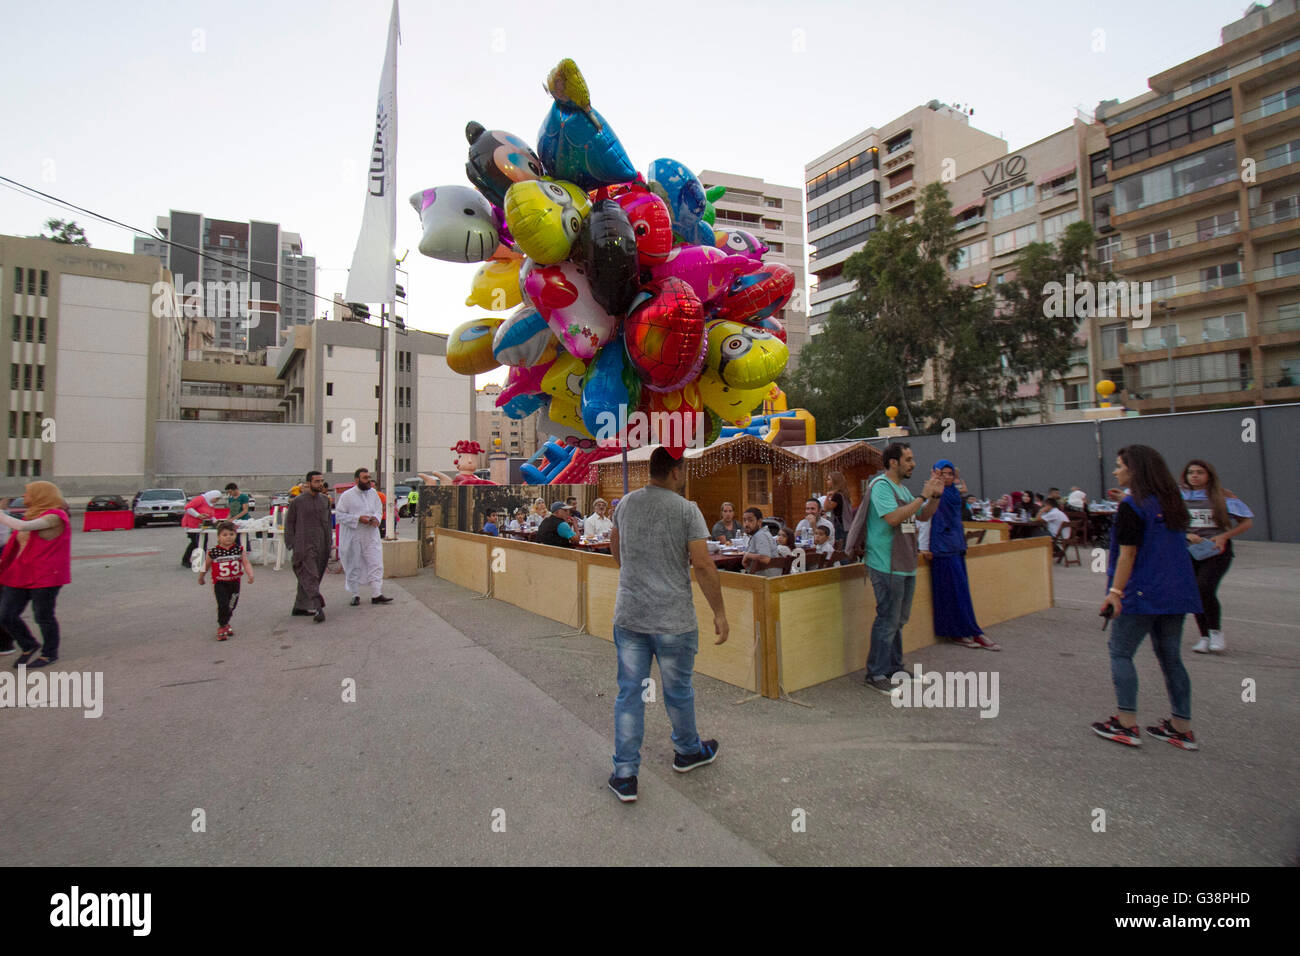 Beirut, Lebanon. 9th June, 2016. A man carries balloons as Devout Muslim families prepare to end their daily Ramadan fast at sunset for the evening meal known as 'Iftar'  at the purposely built Ramadan Village in Beirut Credit:  amer ghazzal/Alamy Live News Stock Photo